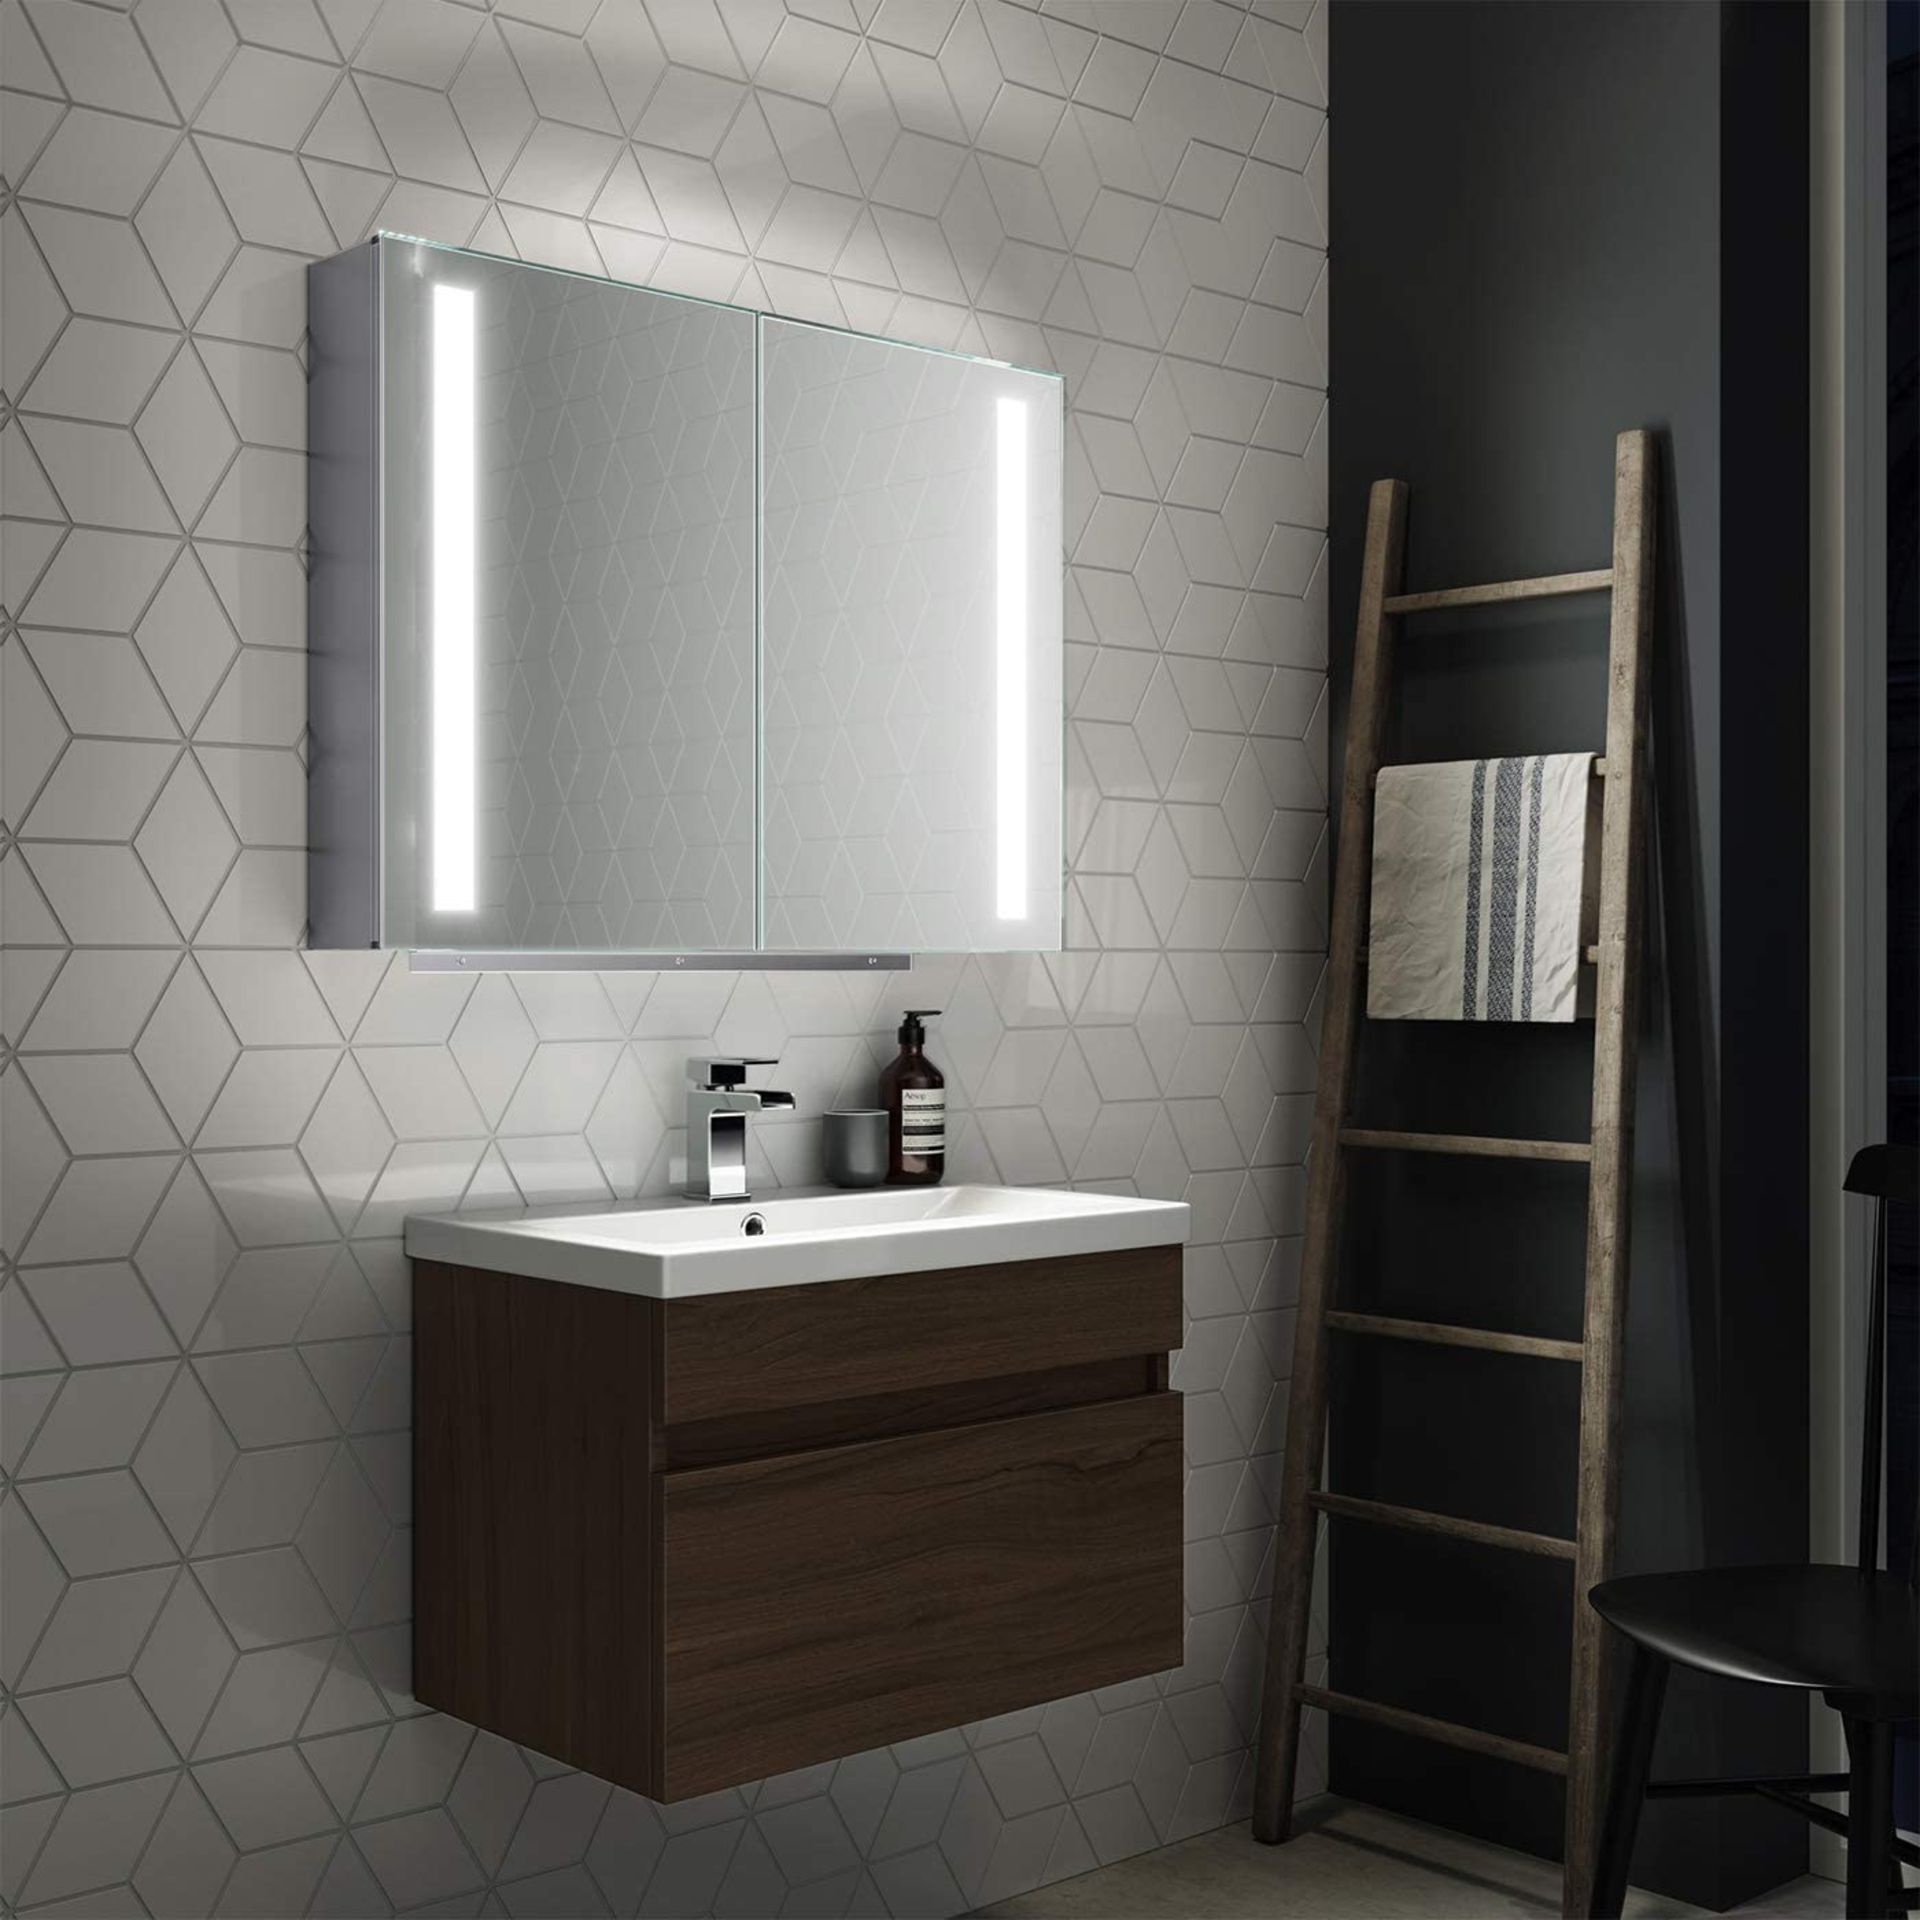 NEW 800x600 Dawn Illuminated LED Mirror Cabinet. RRP £939.99.MC164.We love this mirror cabinet as it - Image 2 of 2